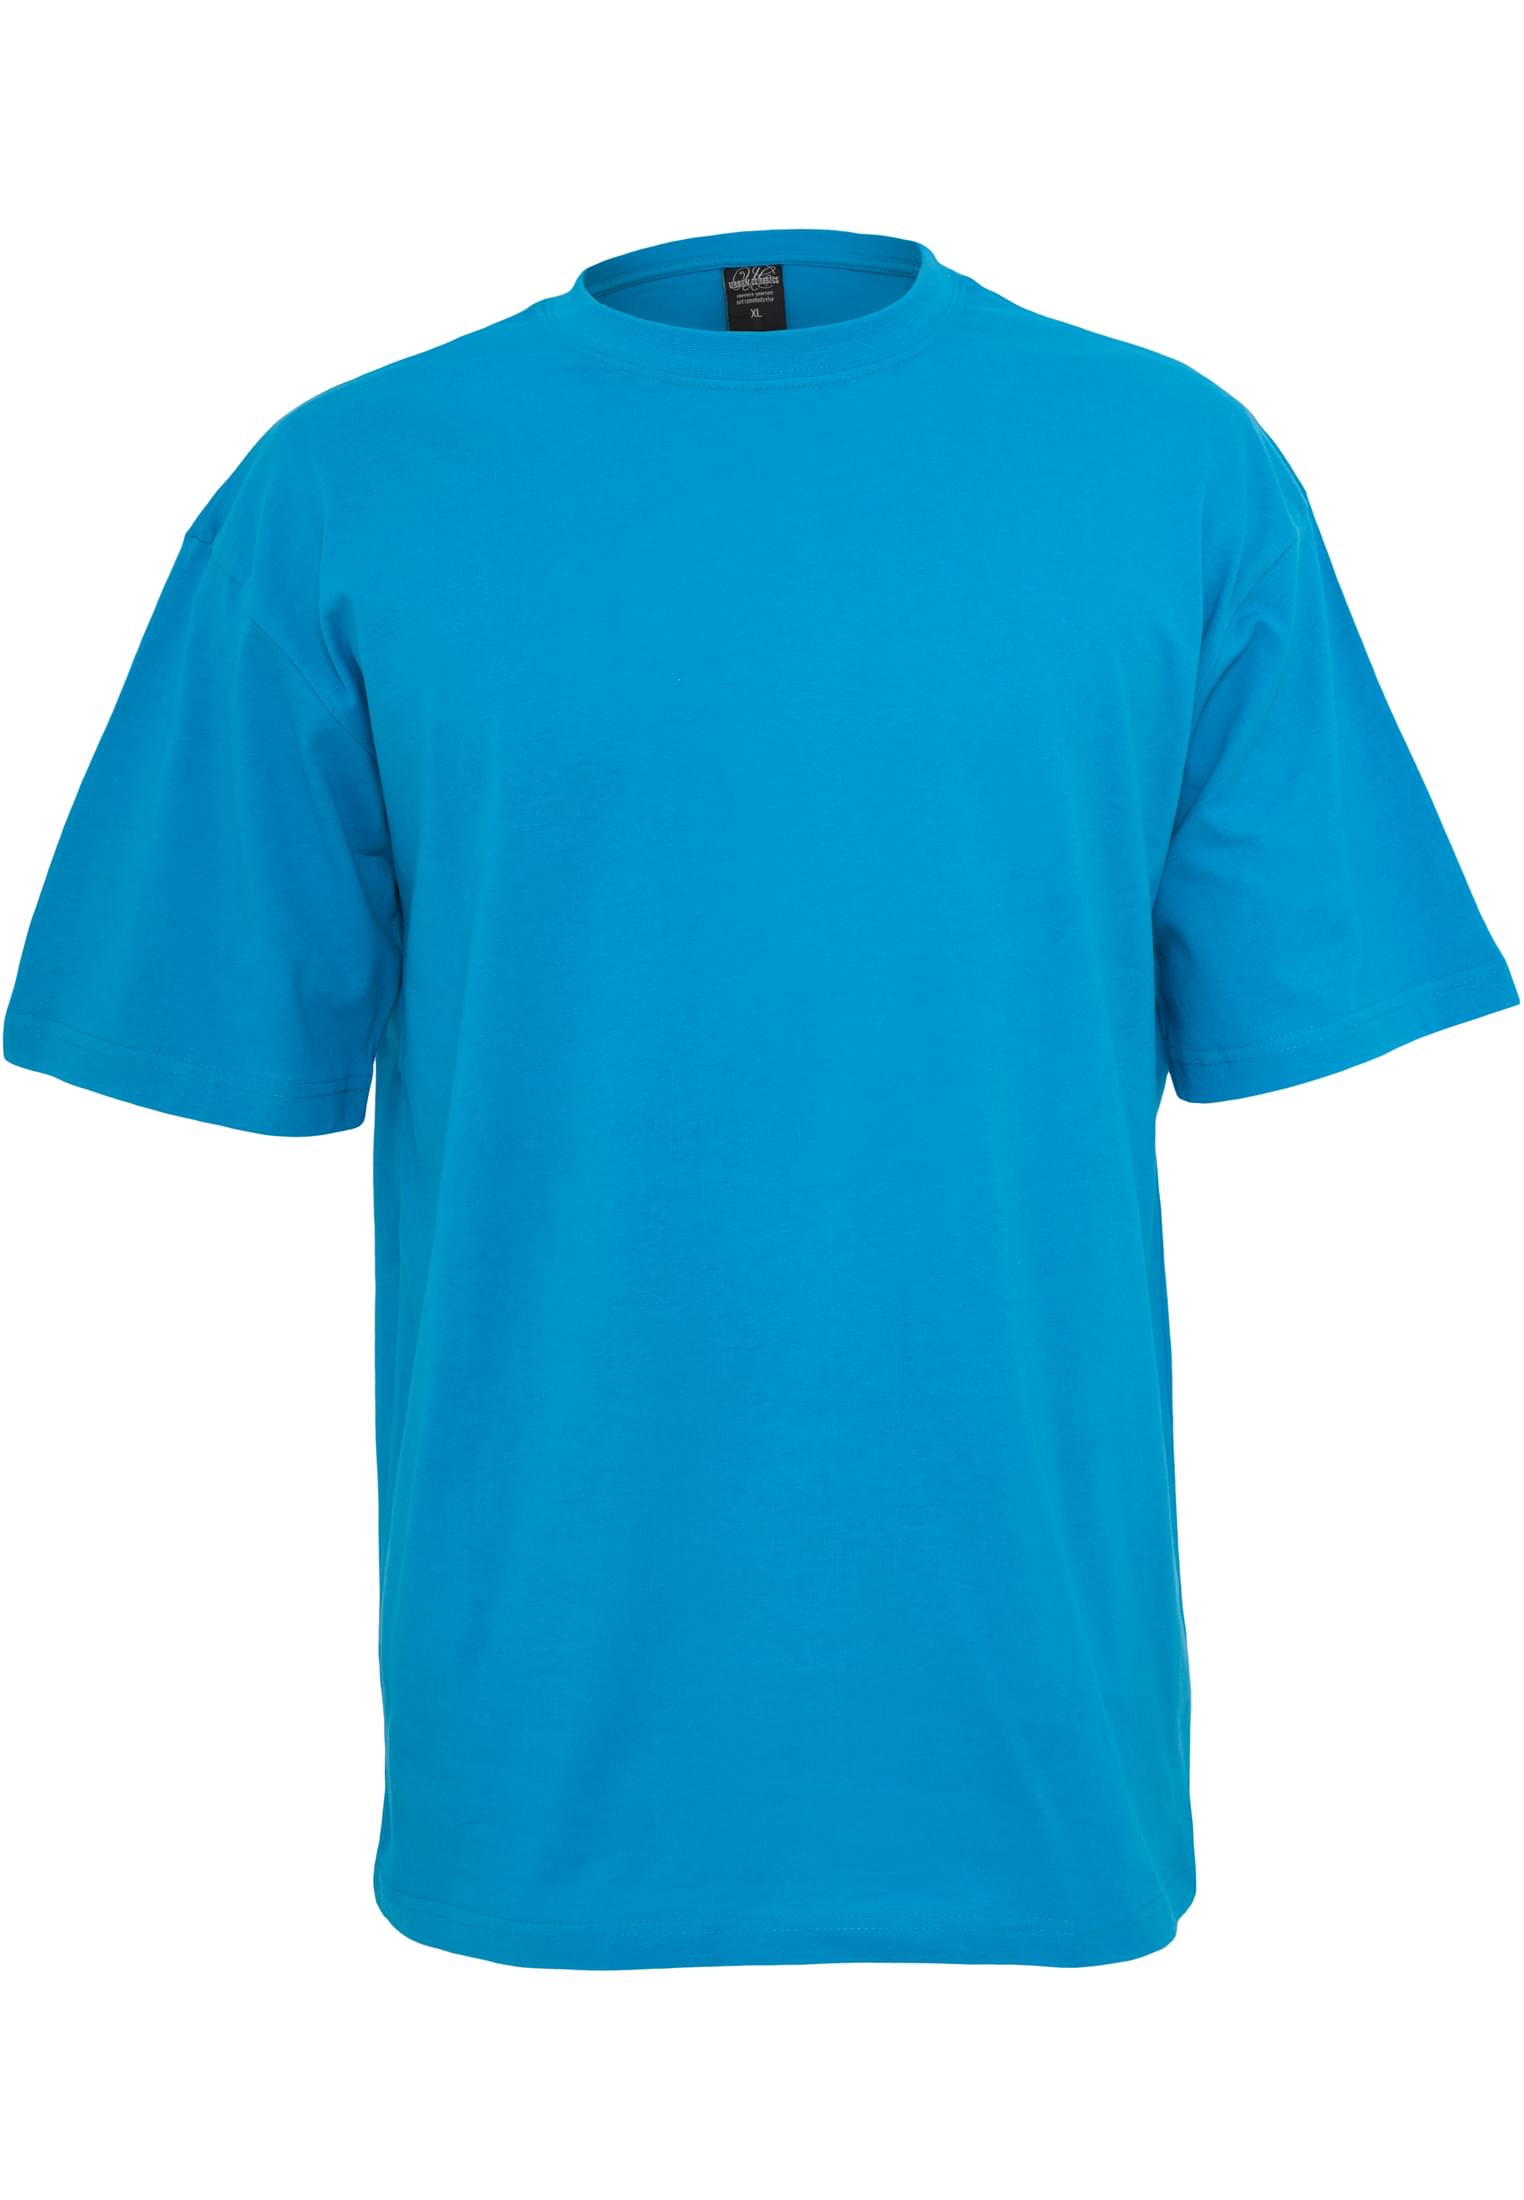 Plus Size Tall Tee in Farbe turquoise